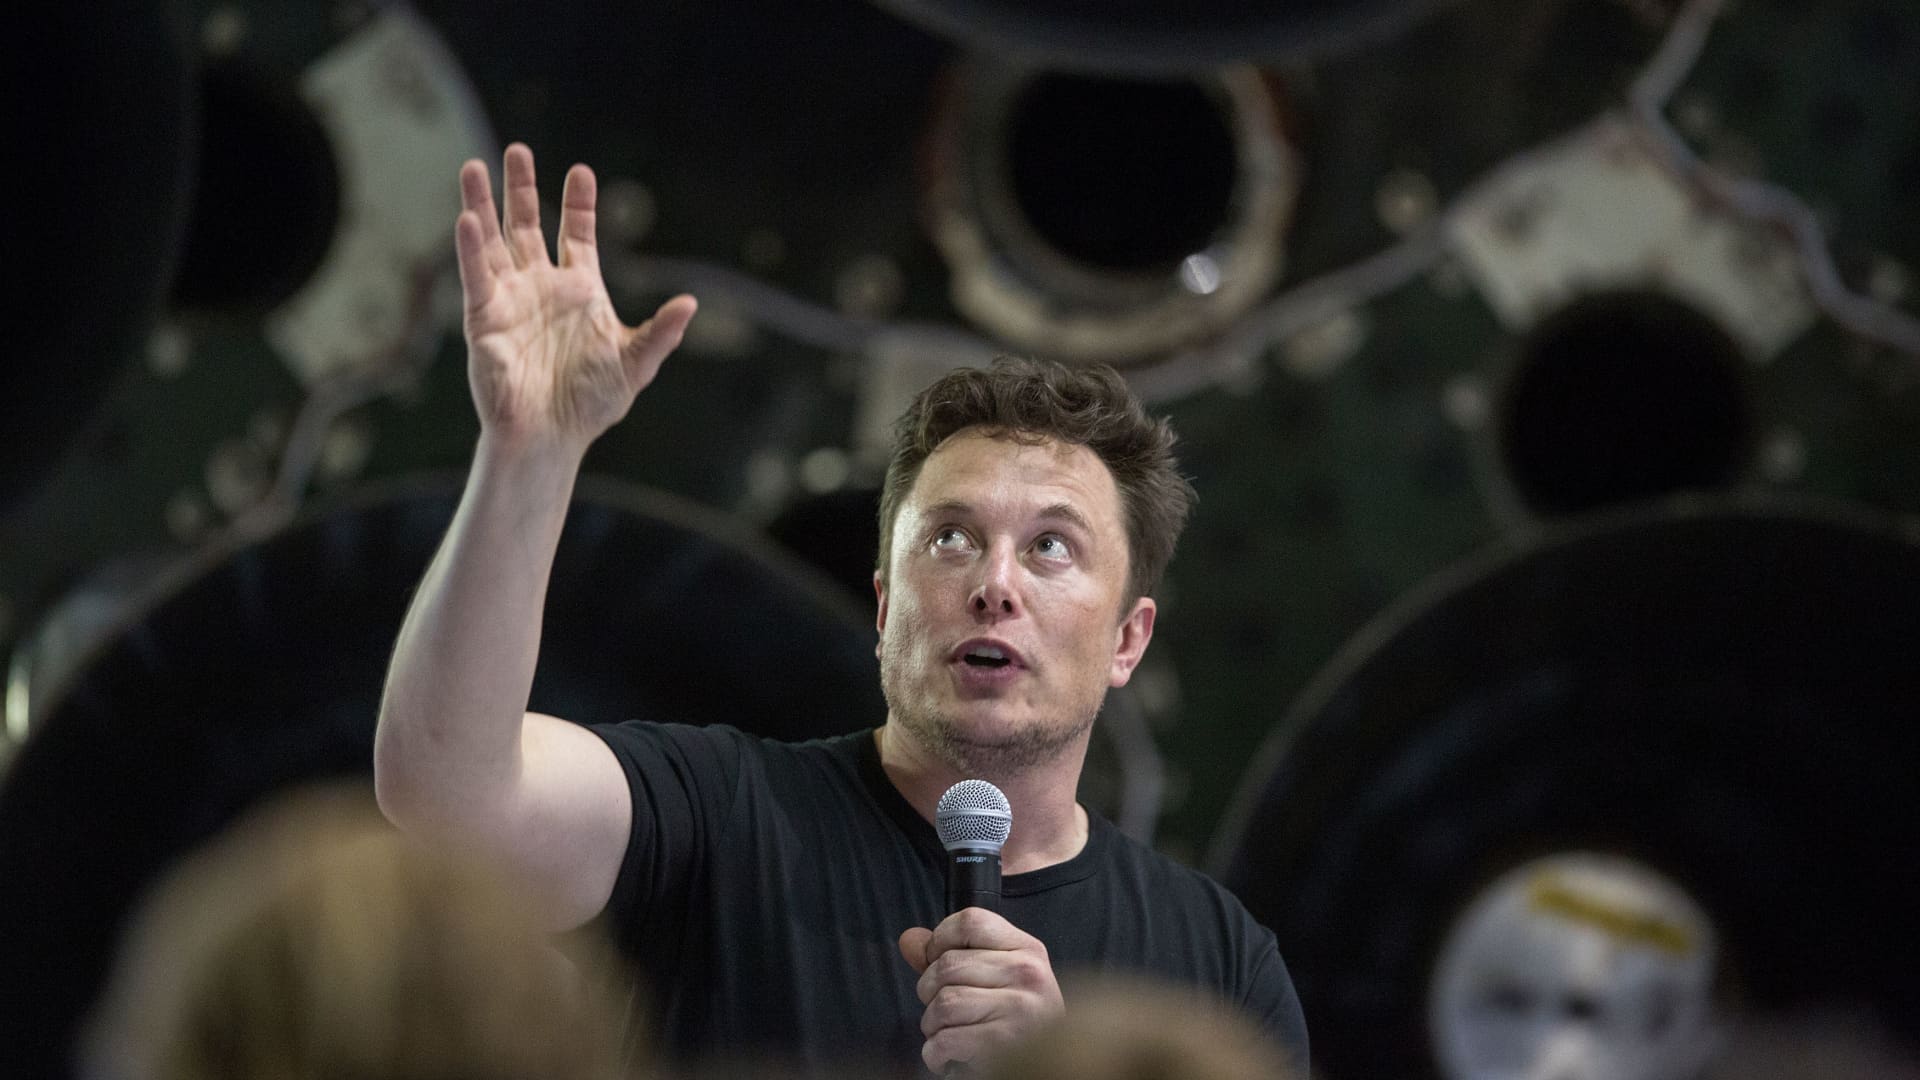 Elon Musk testifies he would have sold SpaceX stock to take Tesla private in 2018